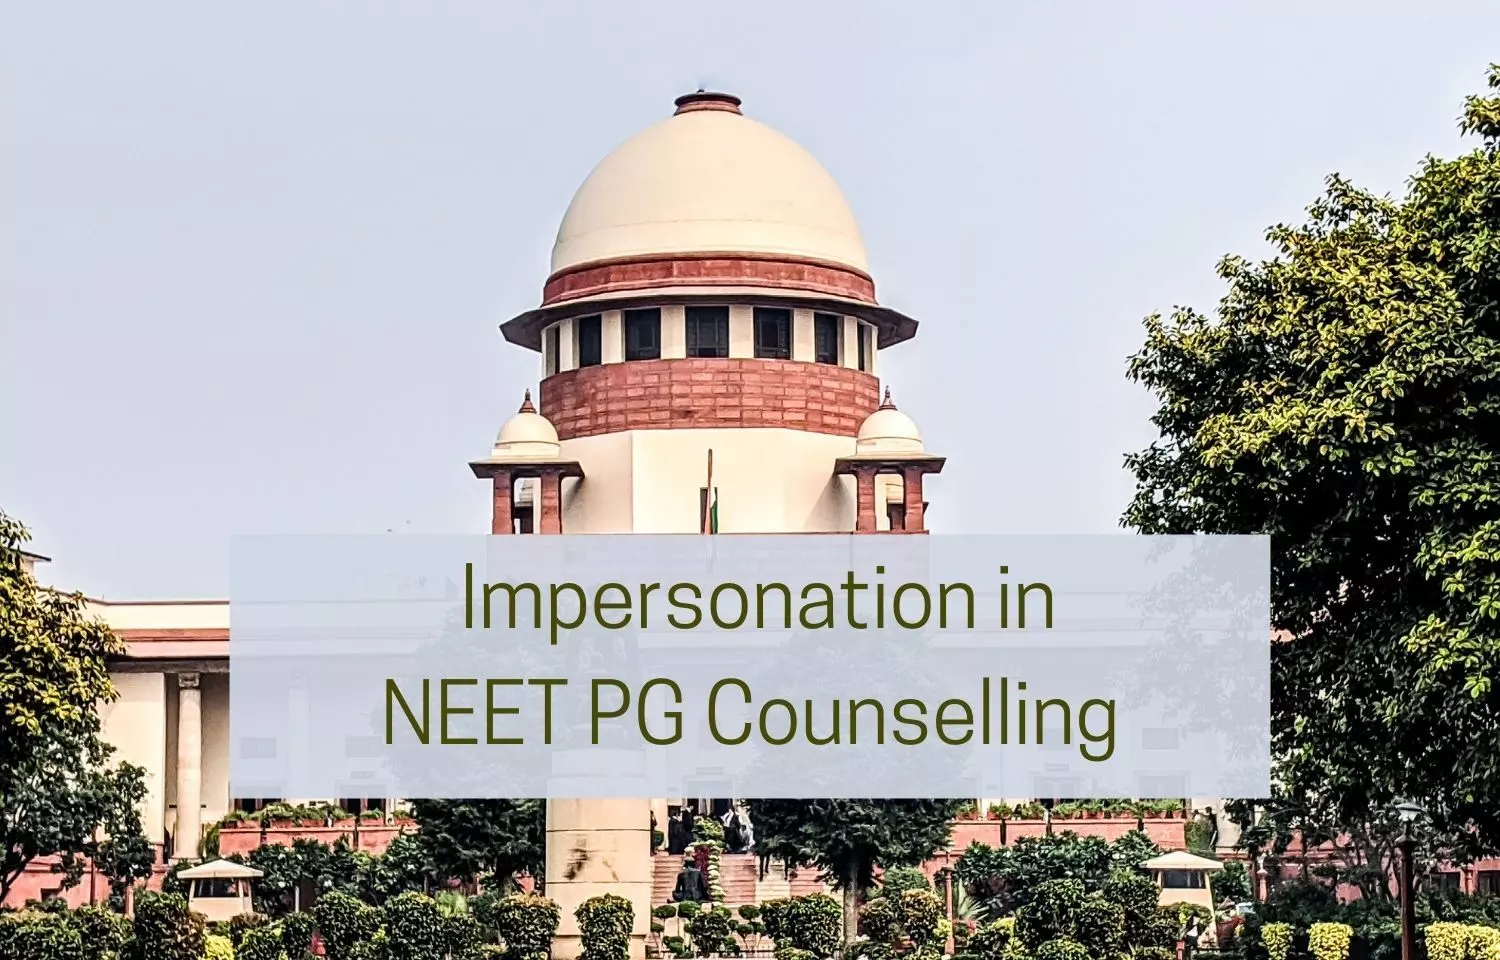 NEET PG impersonation: SC directs Karnataka Medical College to clarify who occupied seat